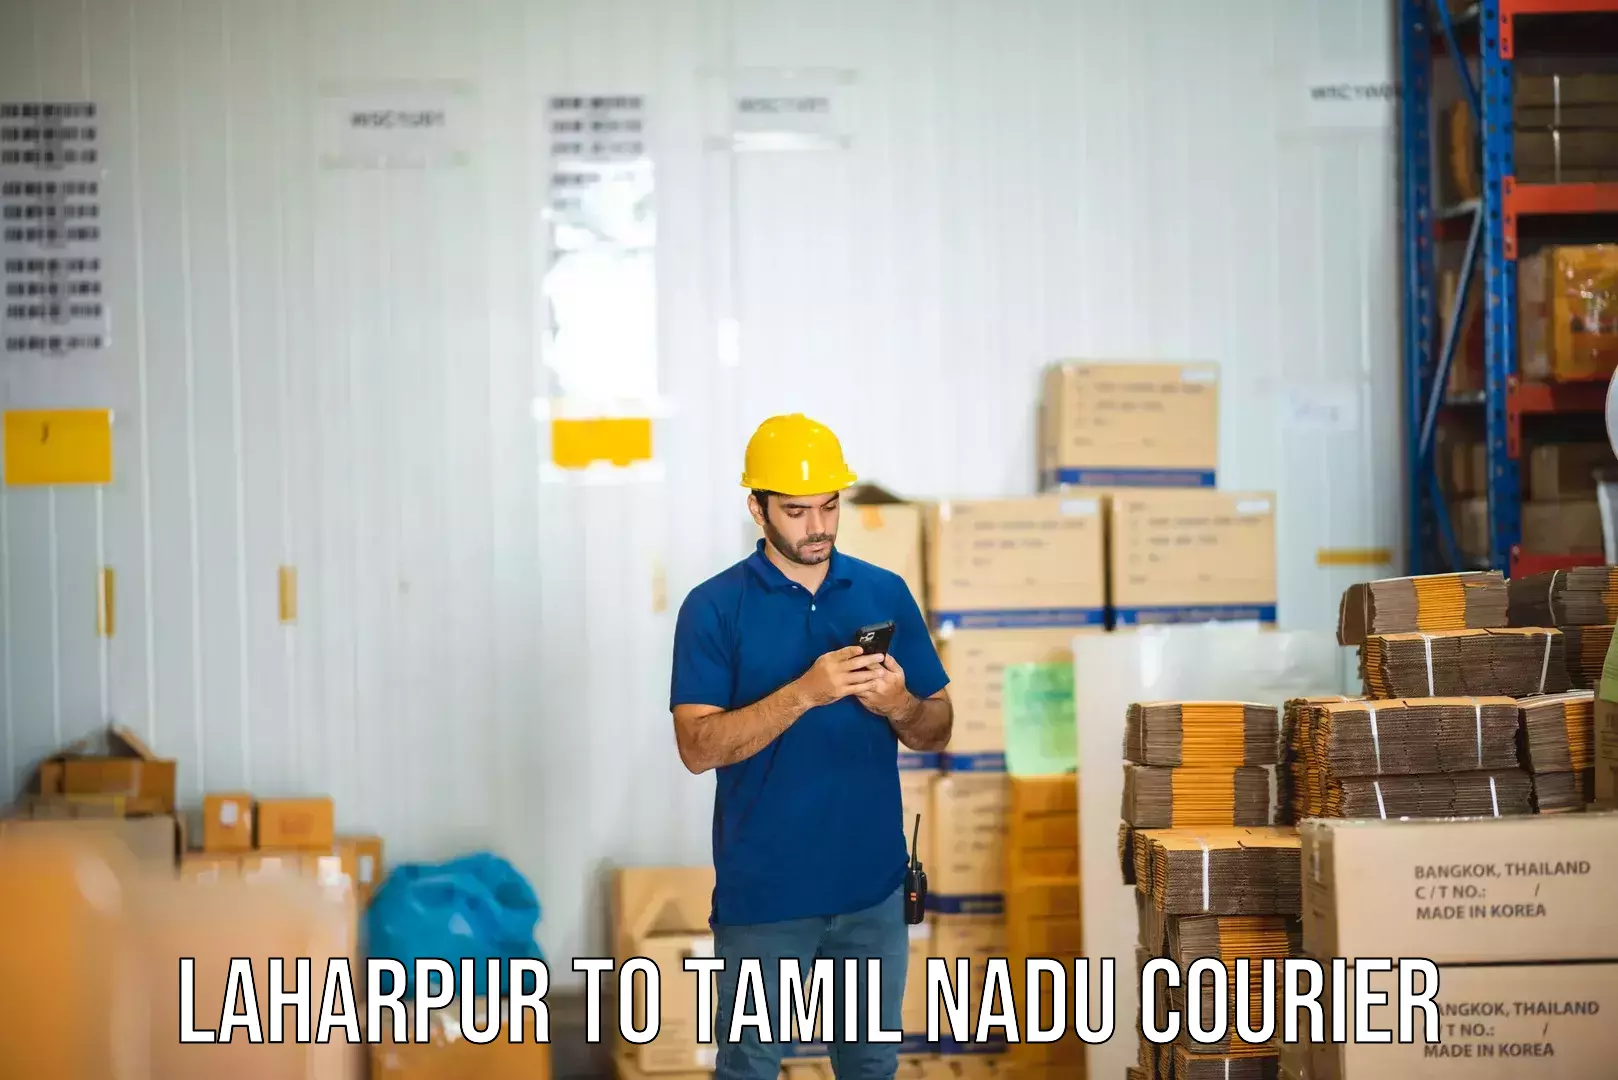 Nationwide shipping services Laharpur to Vallioor